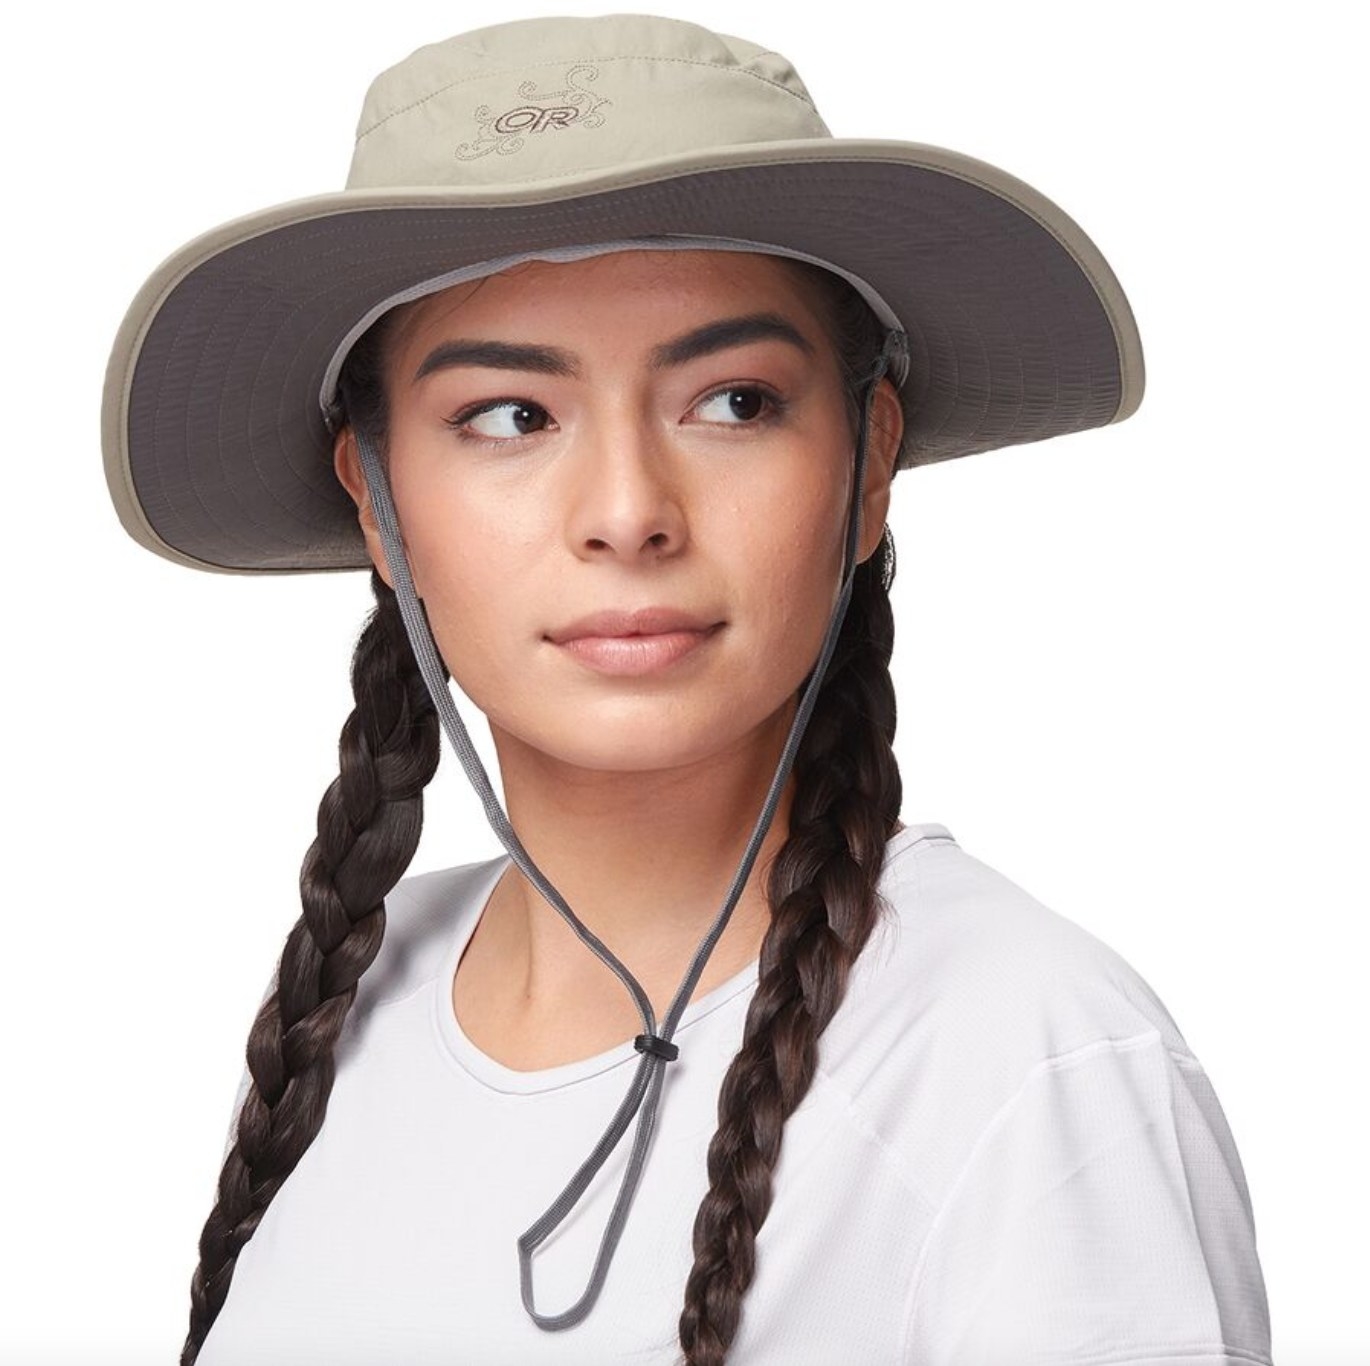 The Outdoor Research sollar roller sun hat on a model